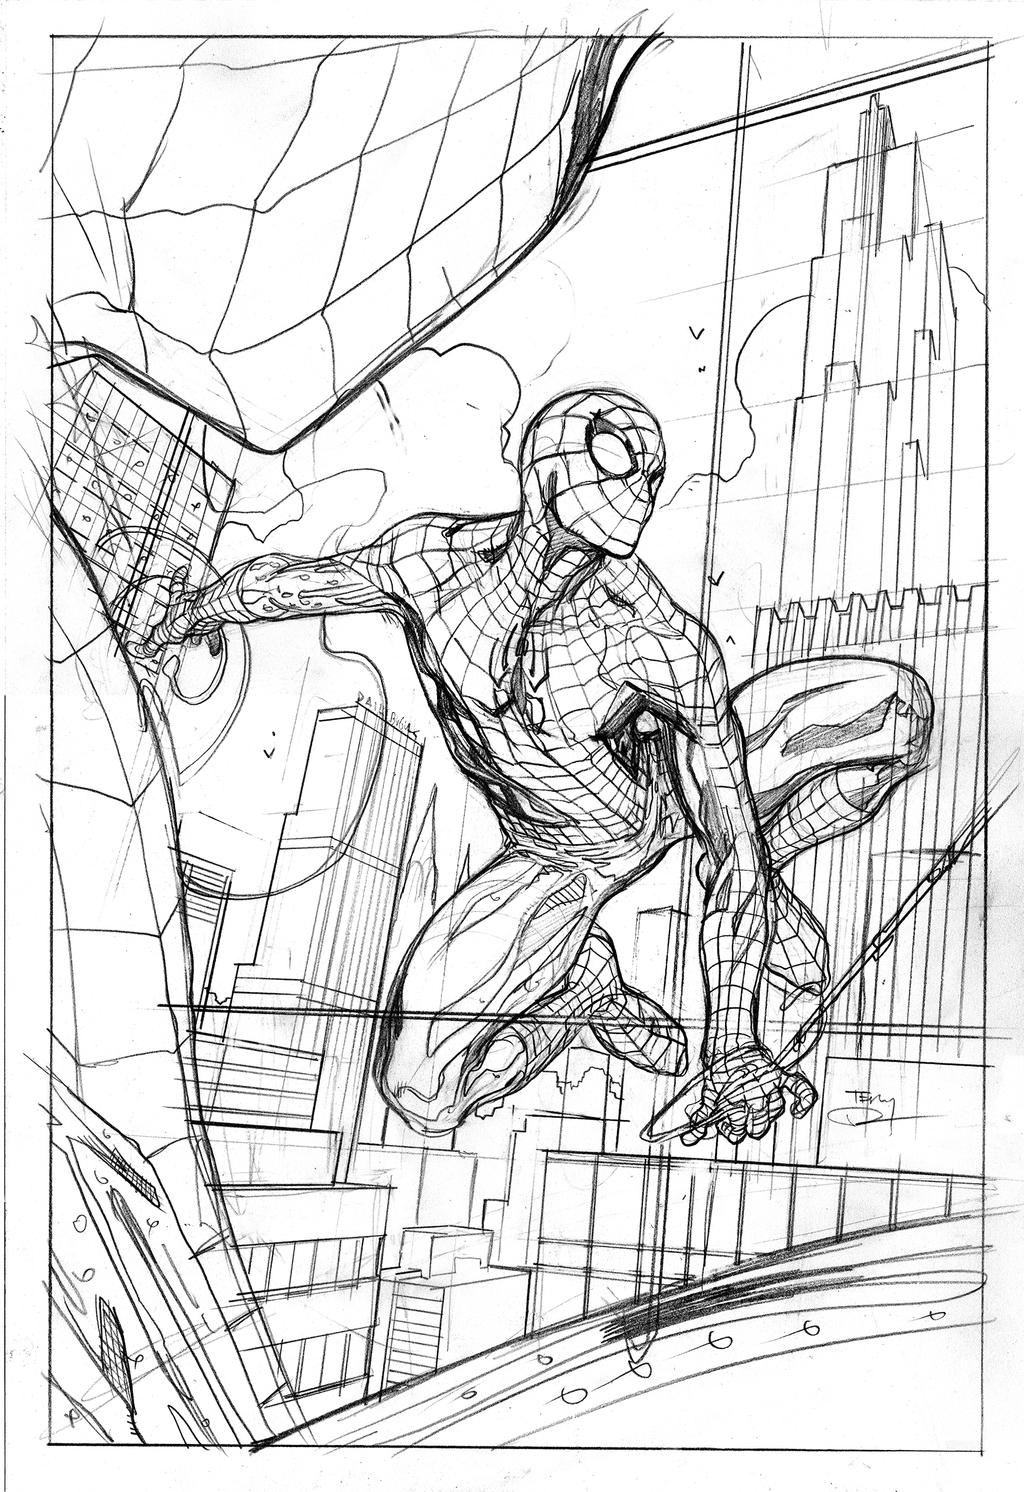 The Amazing Spider-Man #800 Print by Terry Dodson